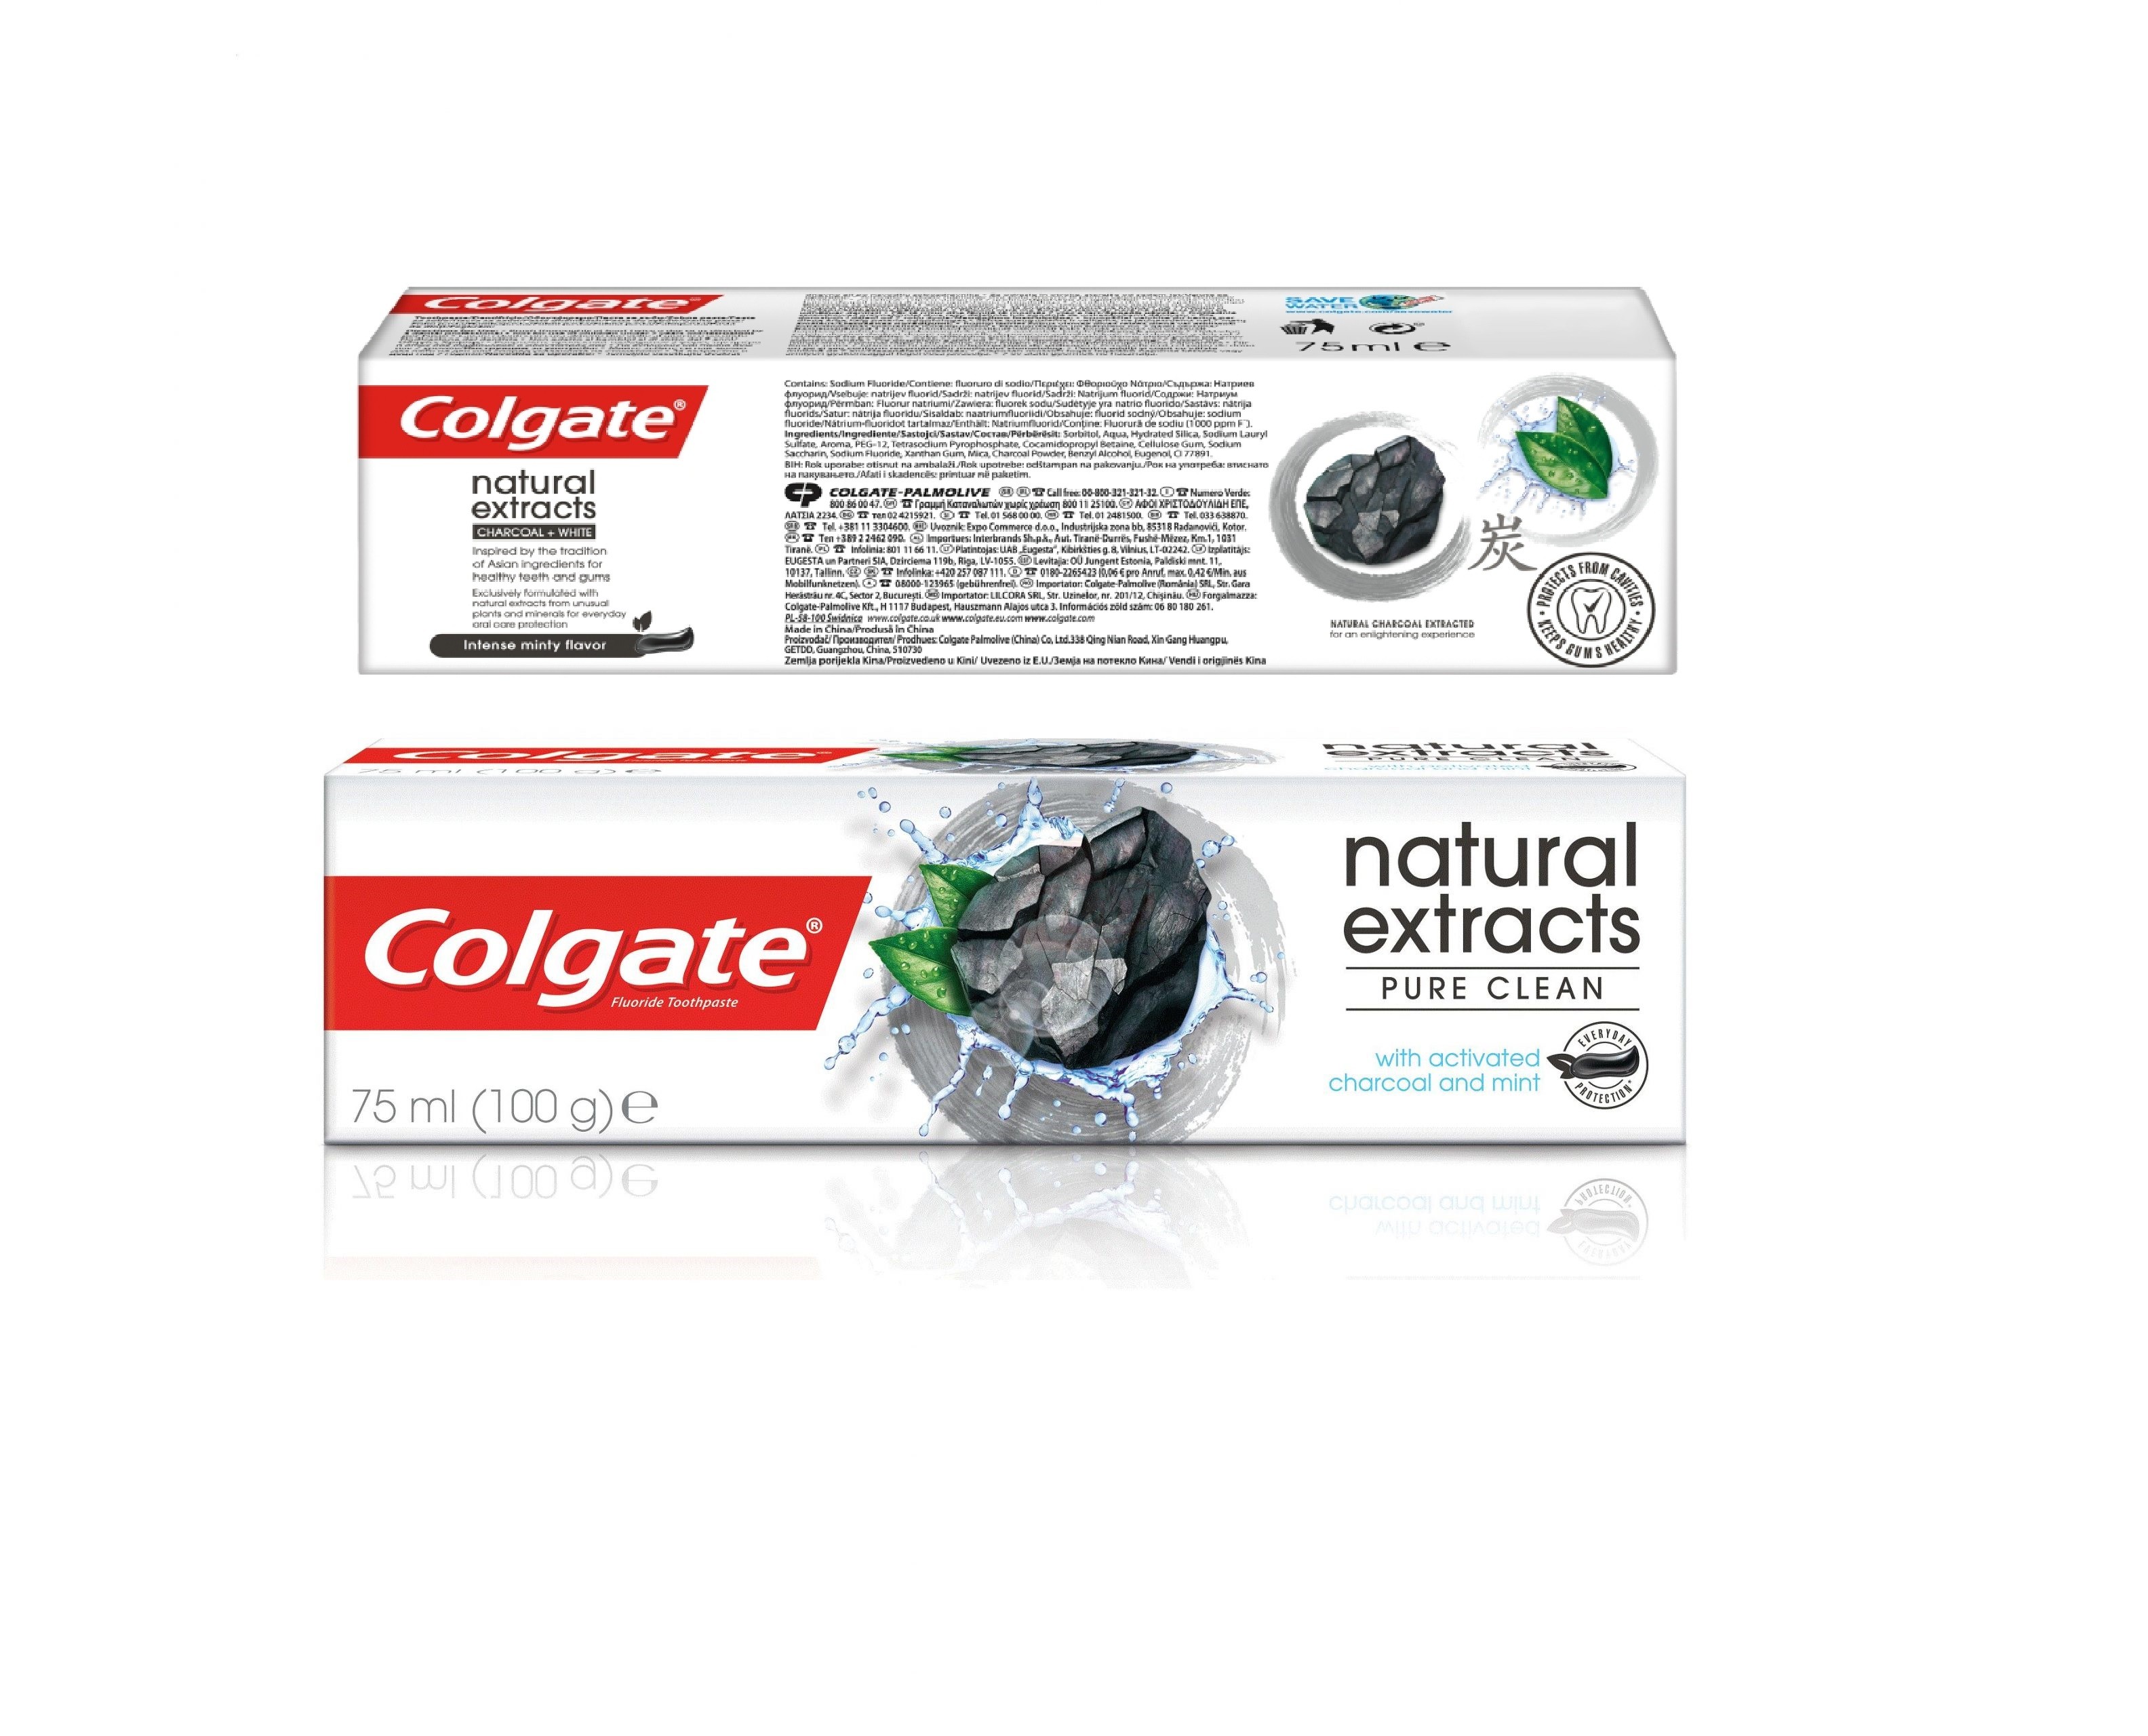 Pasta de dinti Colgate Natural Extracts Activated Charcoal + White Mint  Toothpaste 75ml